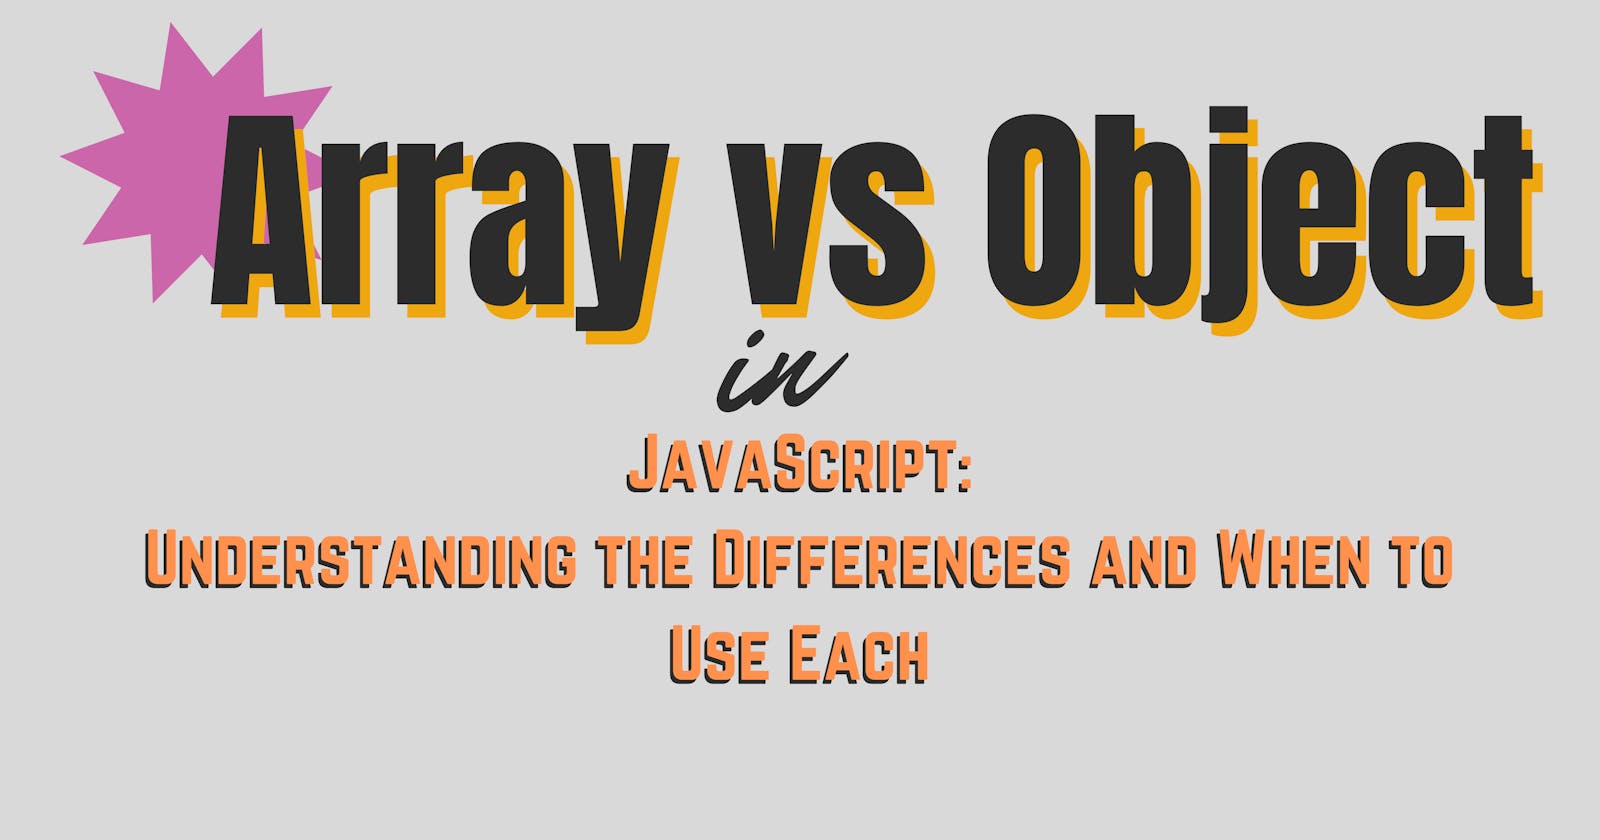 "Array vs Object in JavaScript: Understanding the Differences and When to Use Each ”